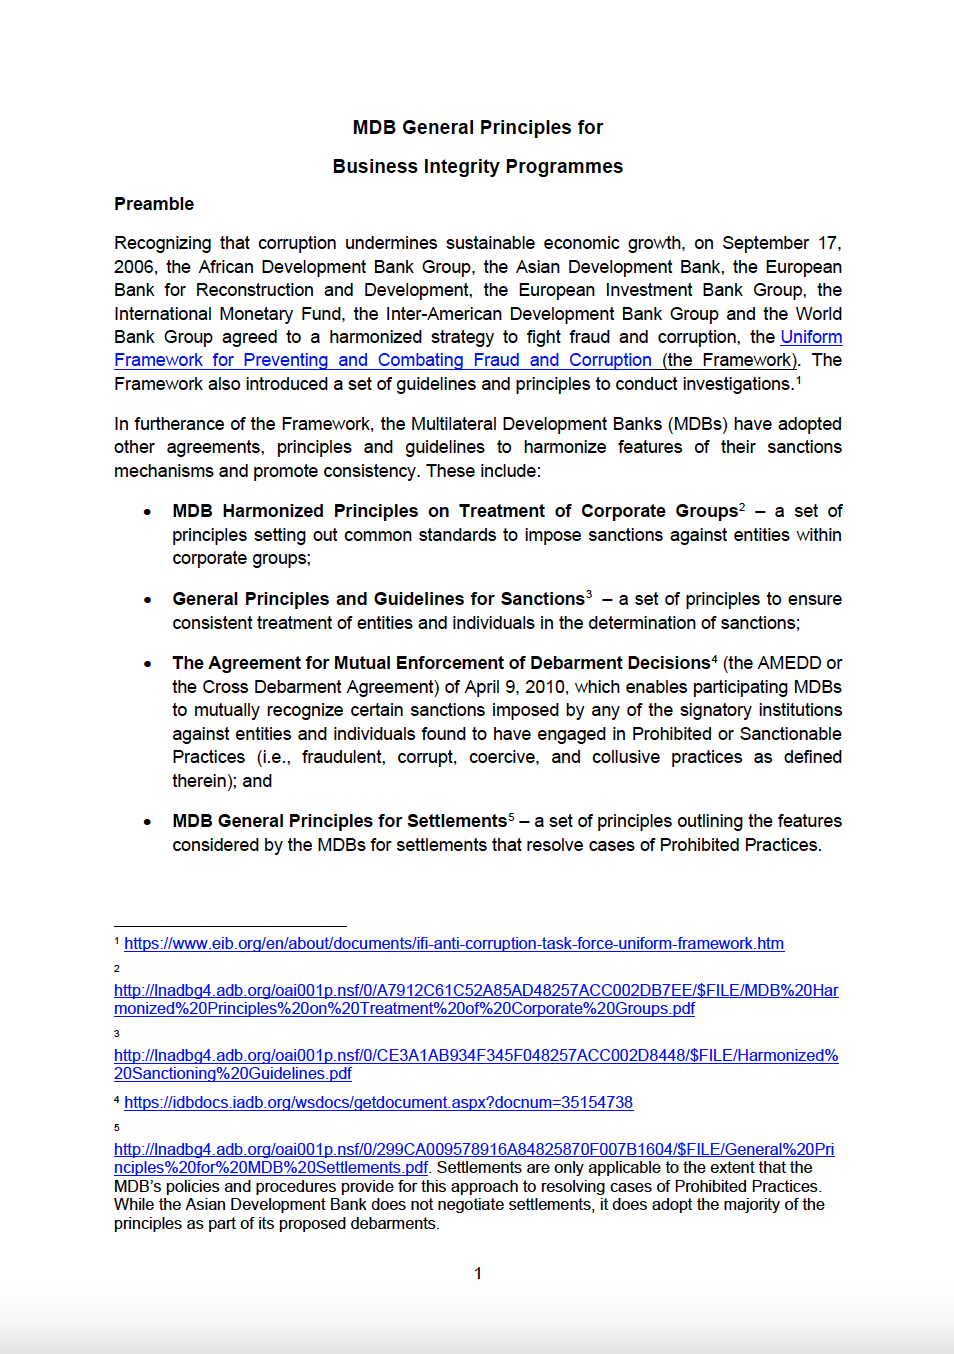 Preamble of the MDB General Principles for Business Integrity Programmes